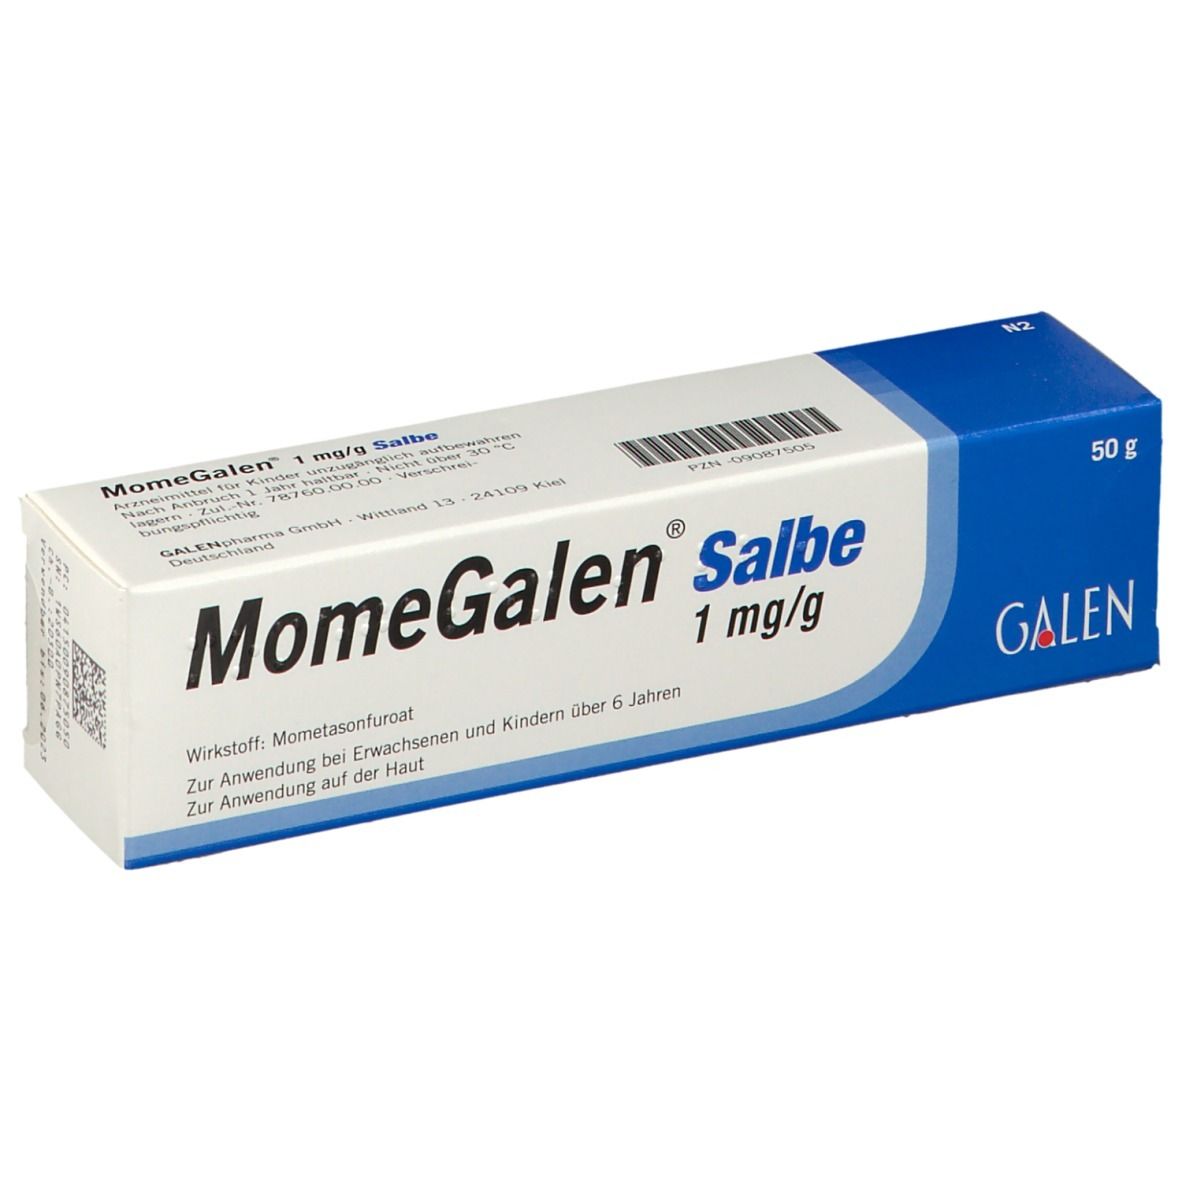 MomeGalen® Salbe